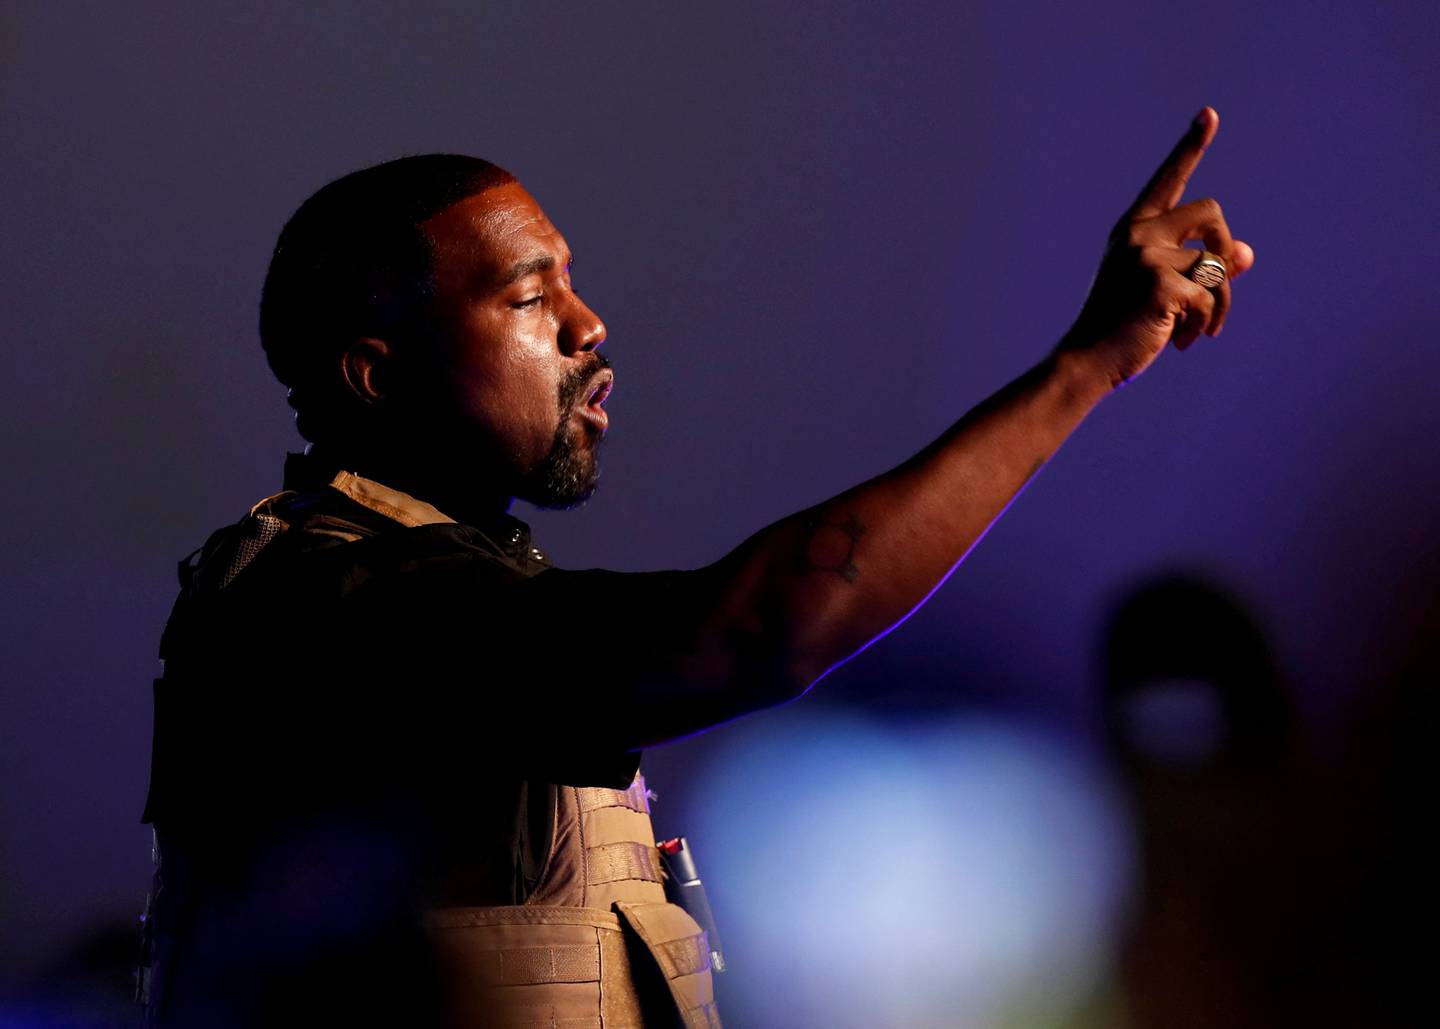 Kanye West's music and fashion career is in turmoil due to his controversial behavior.Reuters